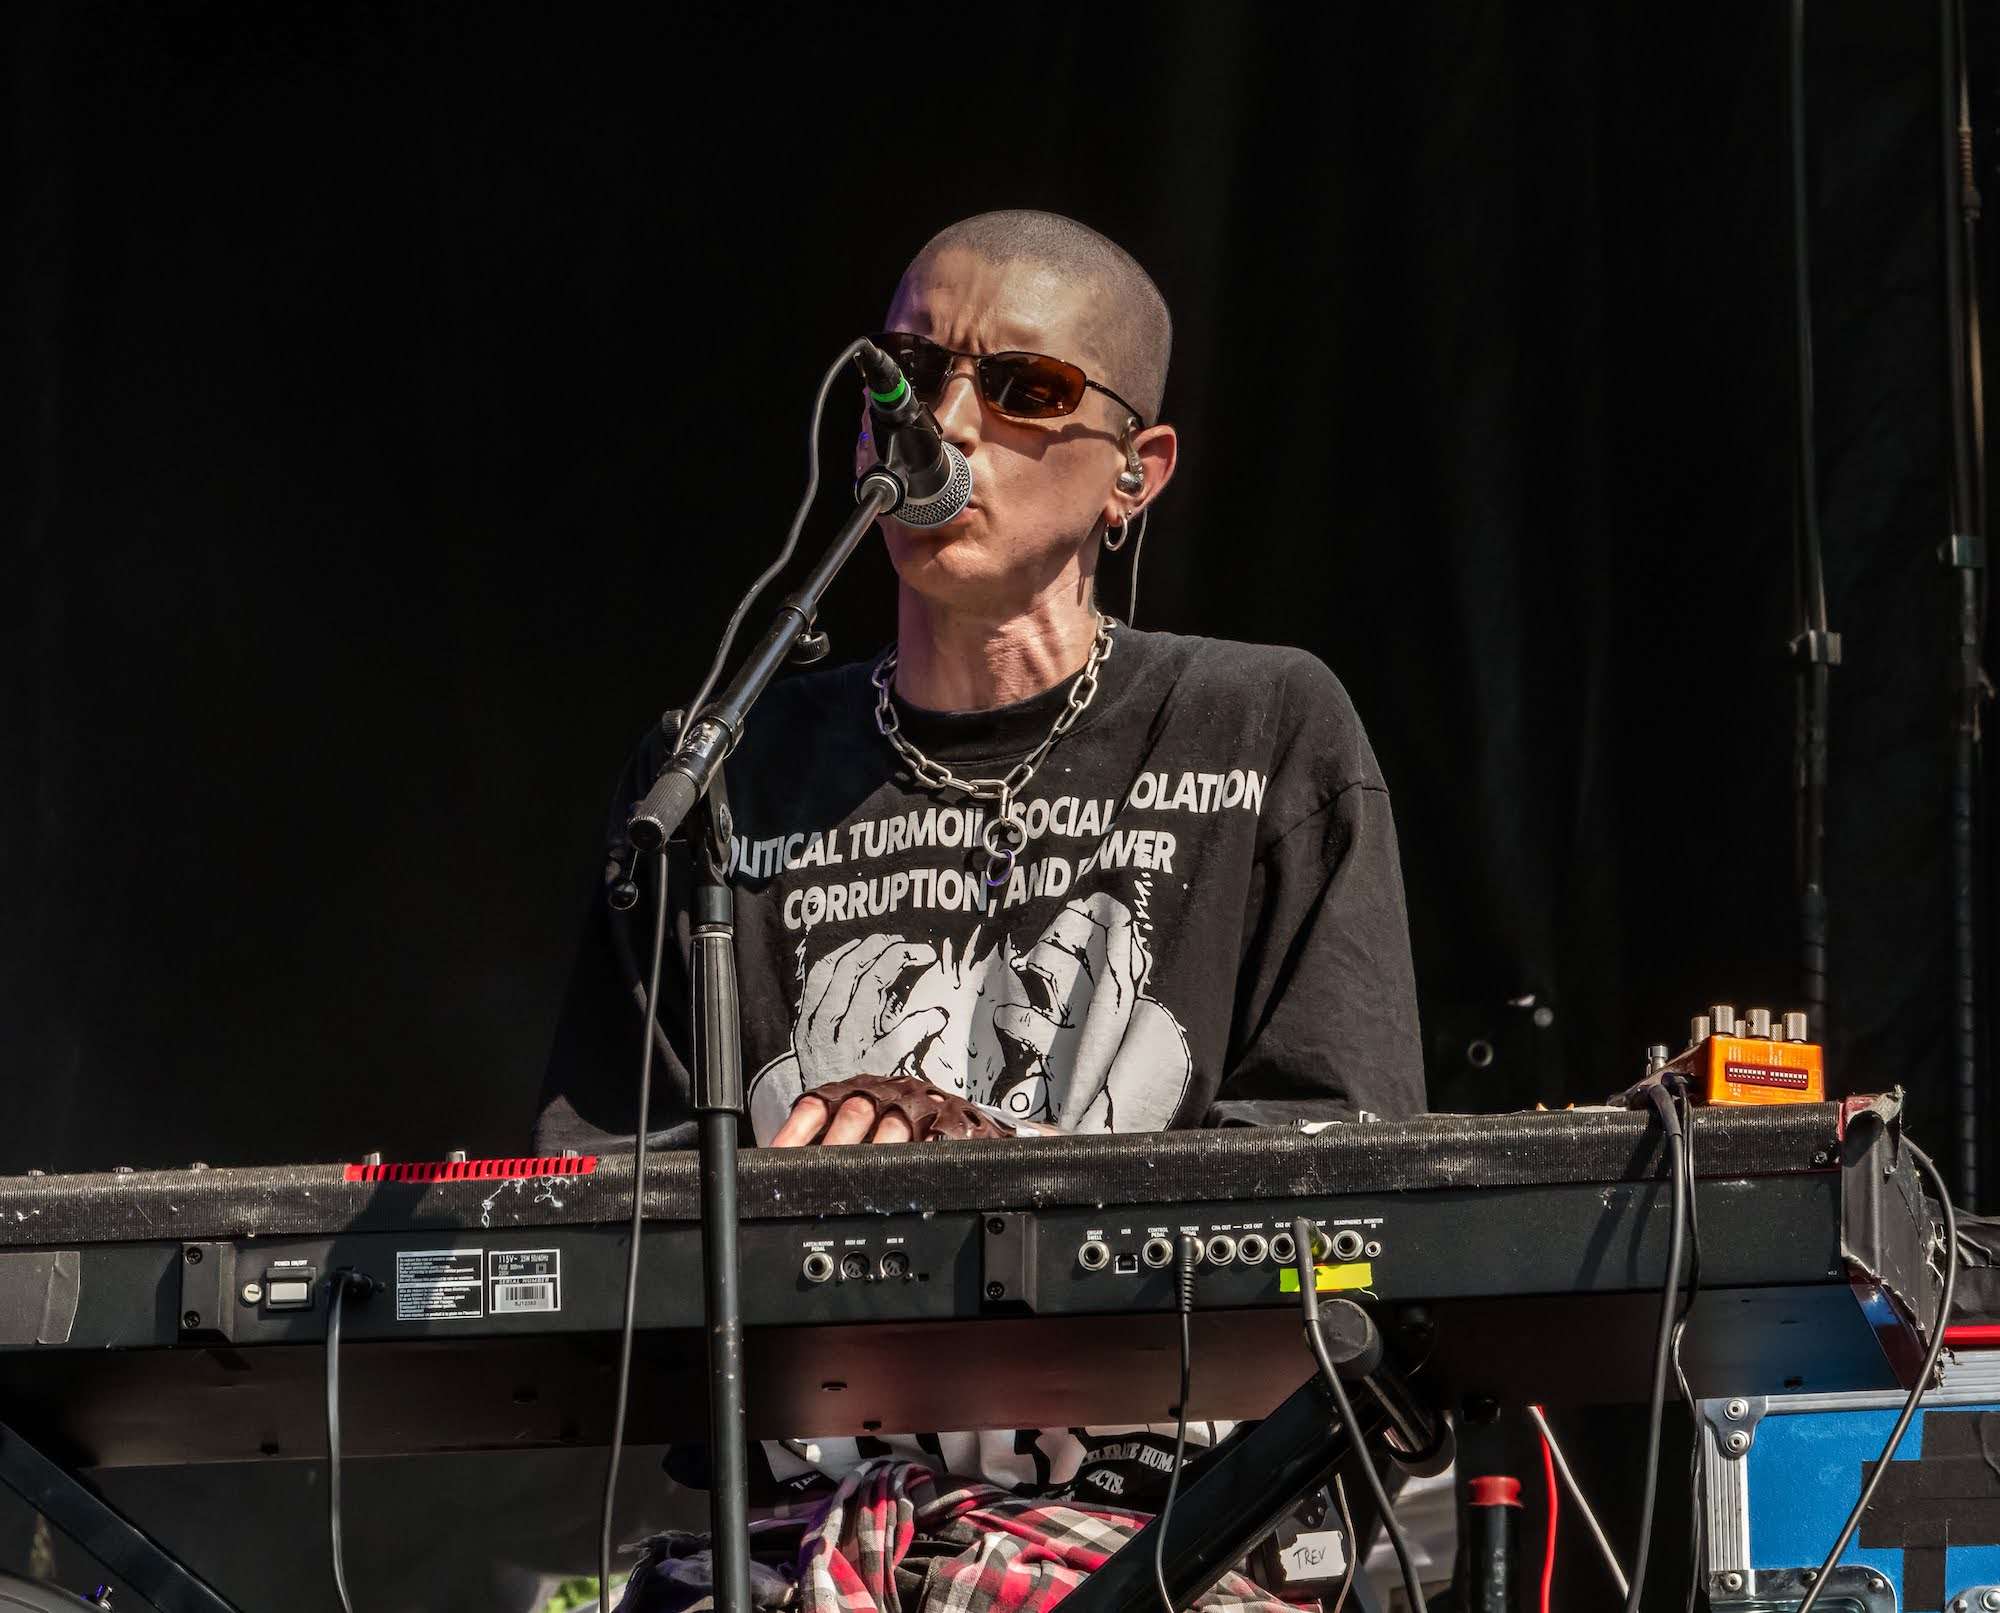 Youth Lagoon Live At Pitchfork [GALLERY] 1